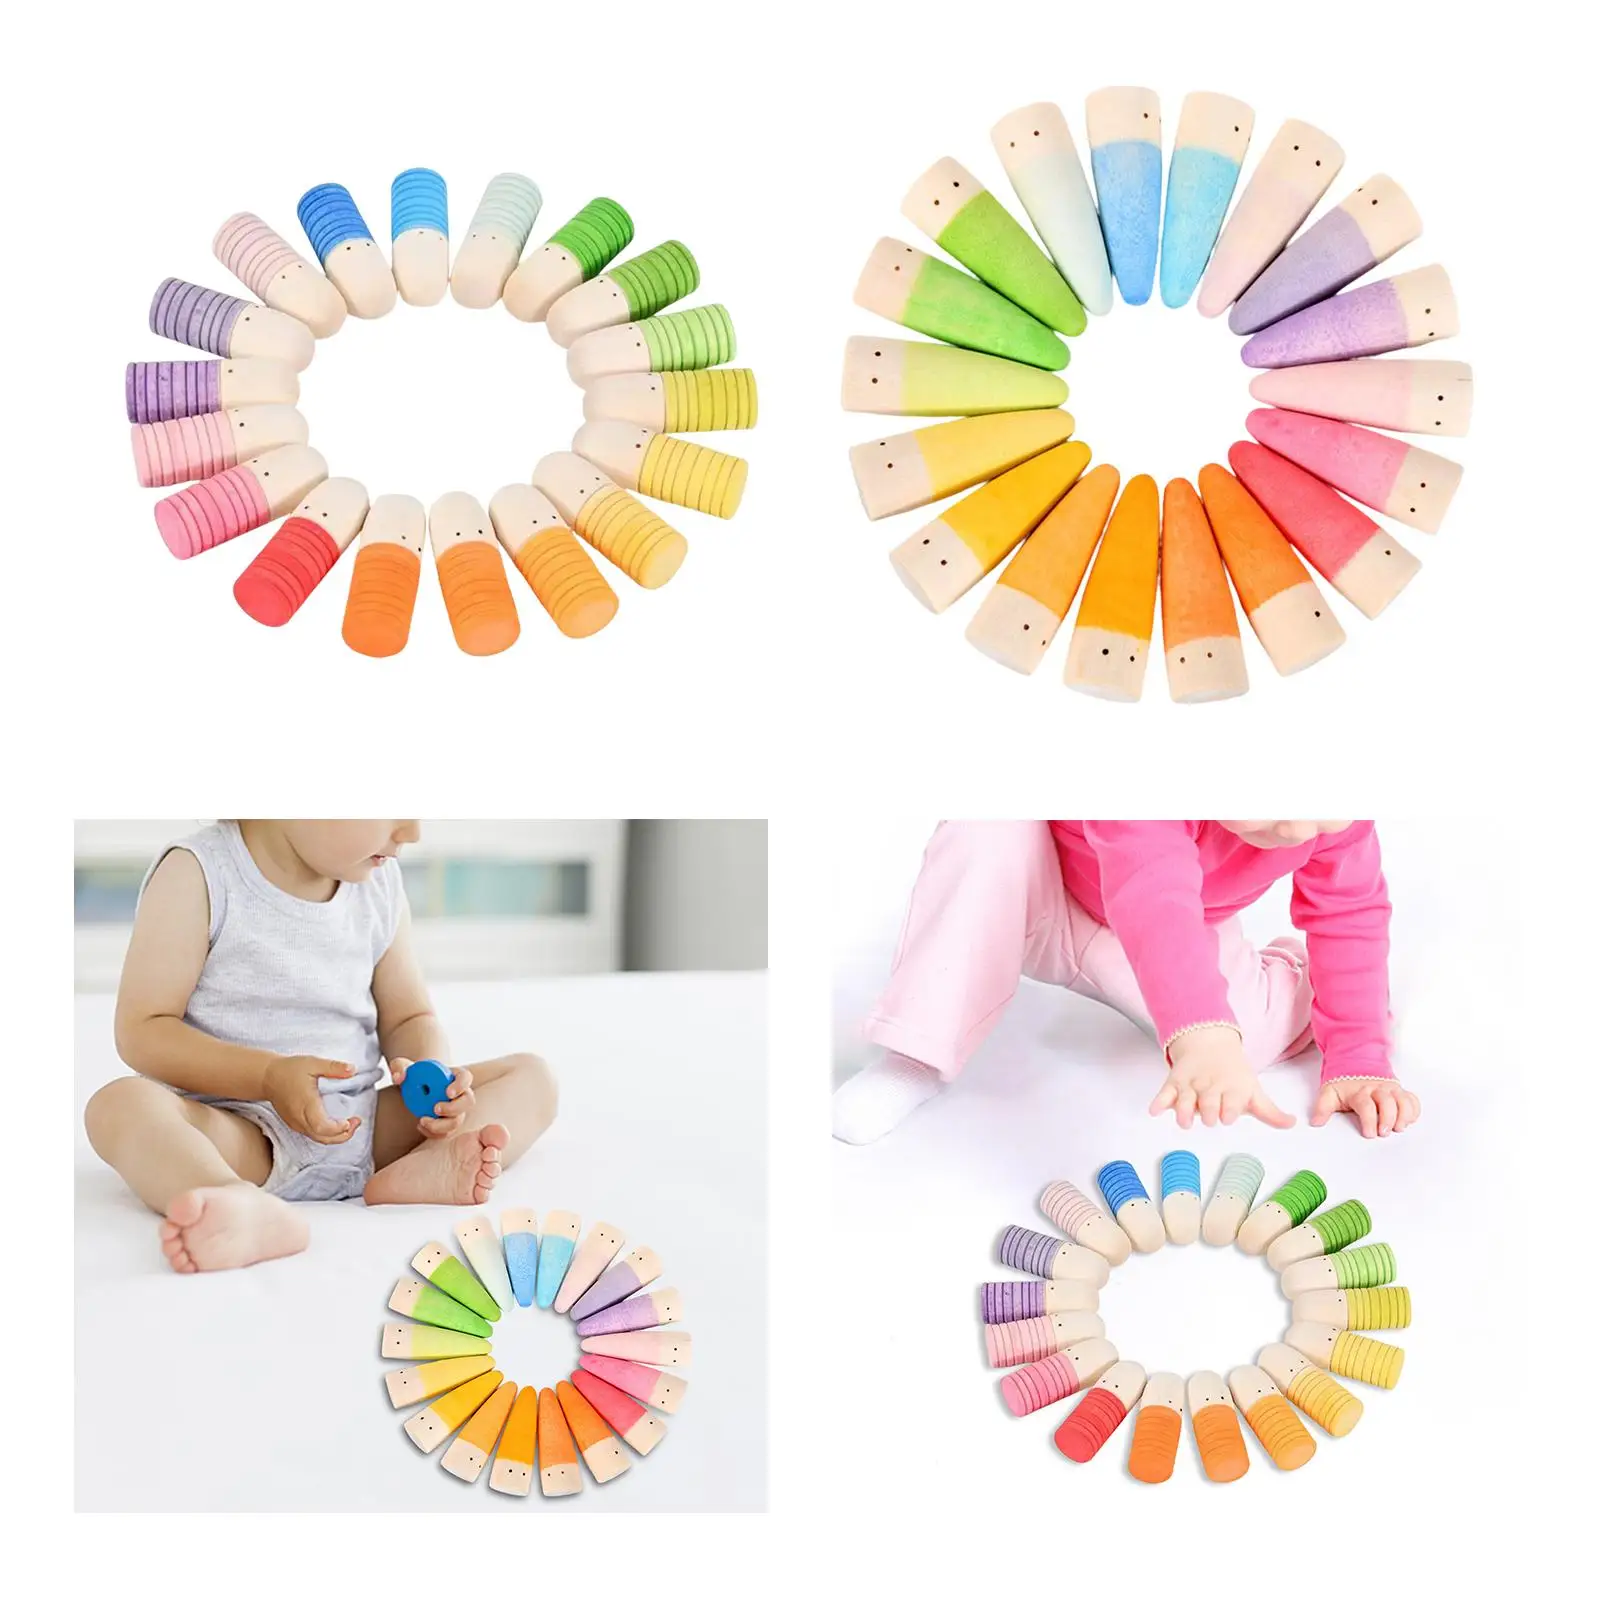 18Pcs Peg People Figures Toys Training Logical Thinking Color Classification Rainbow Peg Dolls for Toddlers for Children Kids